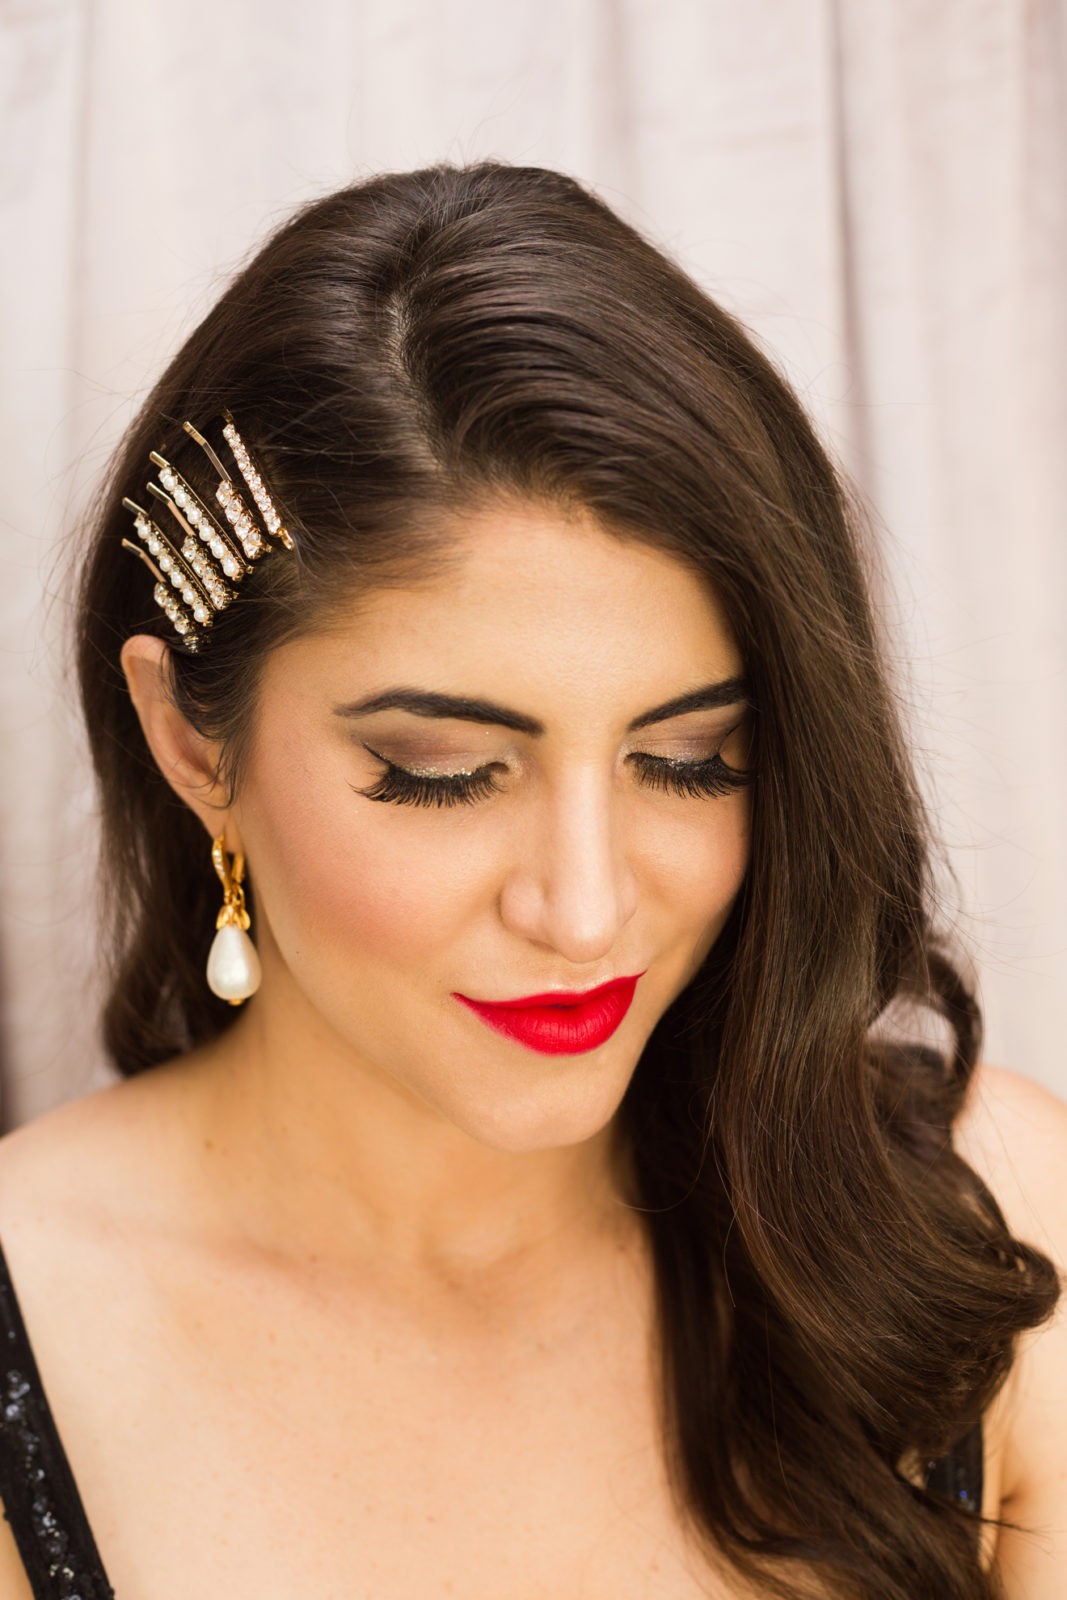 Classic Holiday Makeup Look by Beauty Blogger Laura Lily | Classic Holiday Makeup Tutorial by popular Los Angeles beauty blogger, Laura Lily: image of a woman wearing Nordstrom Oscar de la Renta OSCAR DE LA RENTA Imitation Pearl Drop Earrings, Main, color, PEARL Imitation Pearl Drop Earrings, Nordstrom Bronx and Banco Mademoiselle Noir Sequin Cocktail Dress, Nordstrom Chanel ROUGE ALLURE INK MATTE LIQUID LIP COLOUR, Nordstrom BP. Set of 6 Imitation Pearl & Crystal Hair Clips, Amazon Eylure Nikki Phillippi Feather light Feel Eyelashes, and holding a Target Estee & Lilly Crystal Mesh Pouch Frame Clutch.